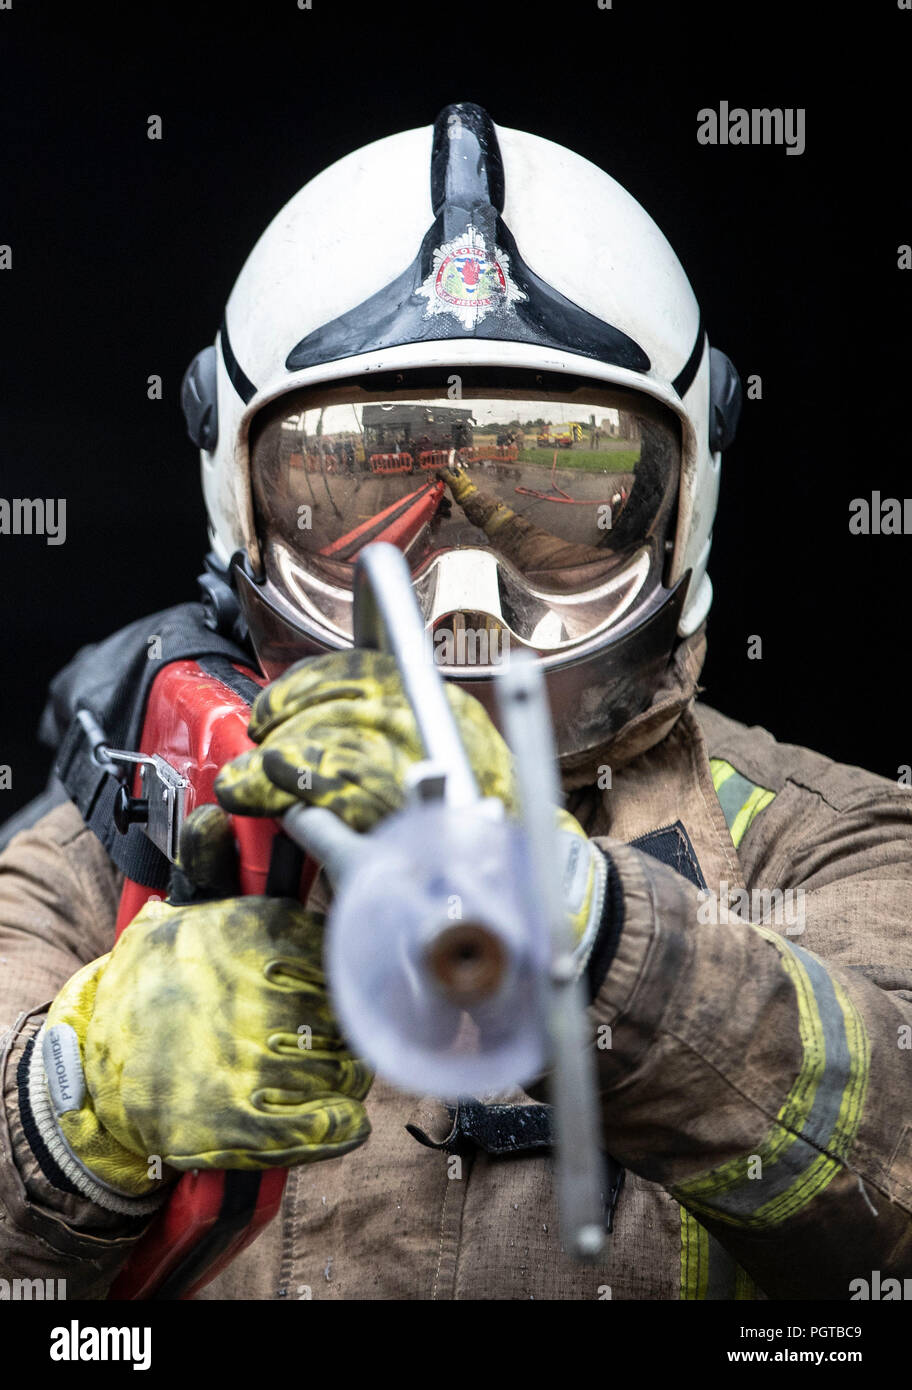 Firefighter watch manager Paul Halliday from the Scottish Fire and Rescue Service, at the National Training Centre in Glasgow, demonstrates a ultra high pressure lance, branded 'Coldcut Cobra', which will enable firefighters to blast a fire suppressant through the wall of a burning building. Stock Photo